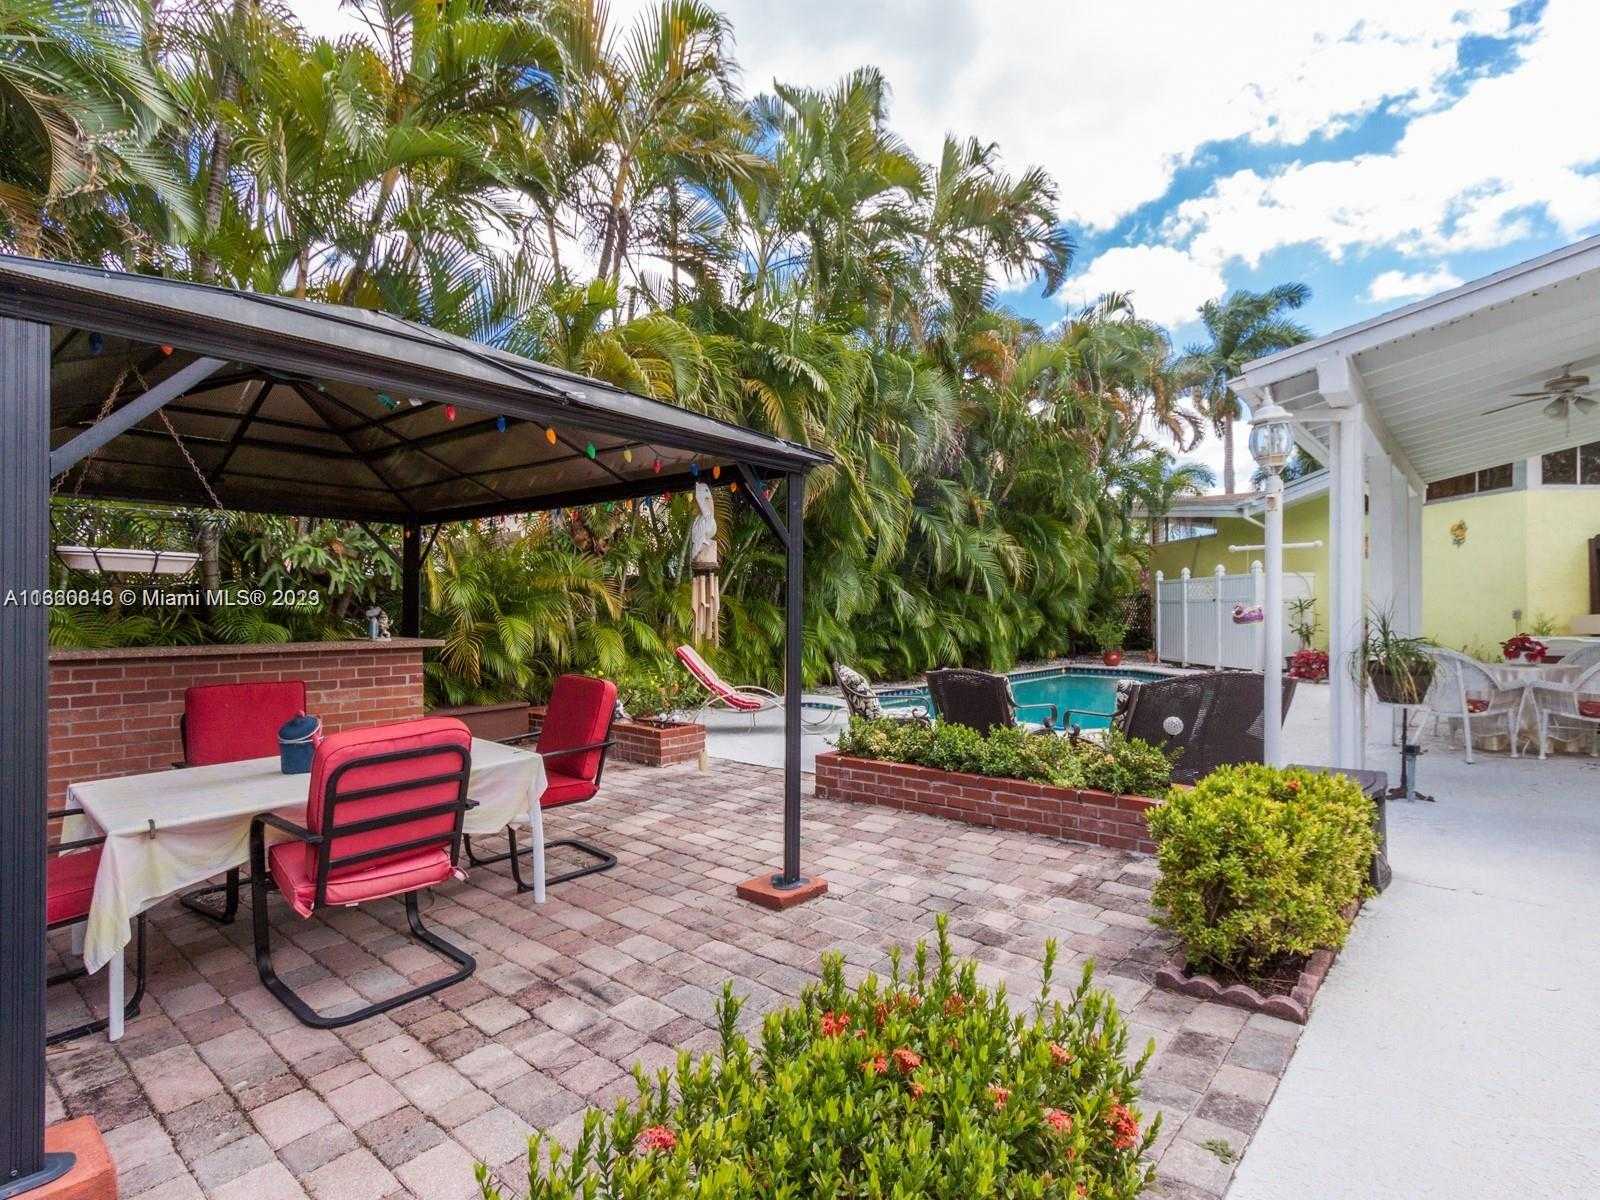 House in Hollywood, Florida 11637501